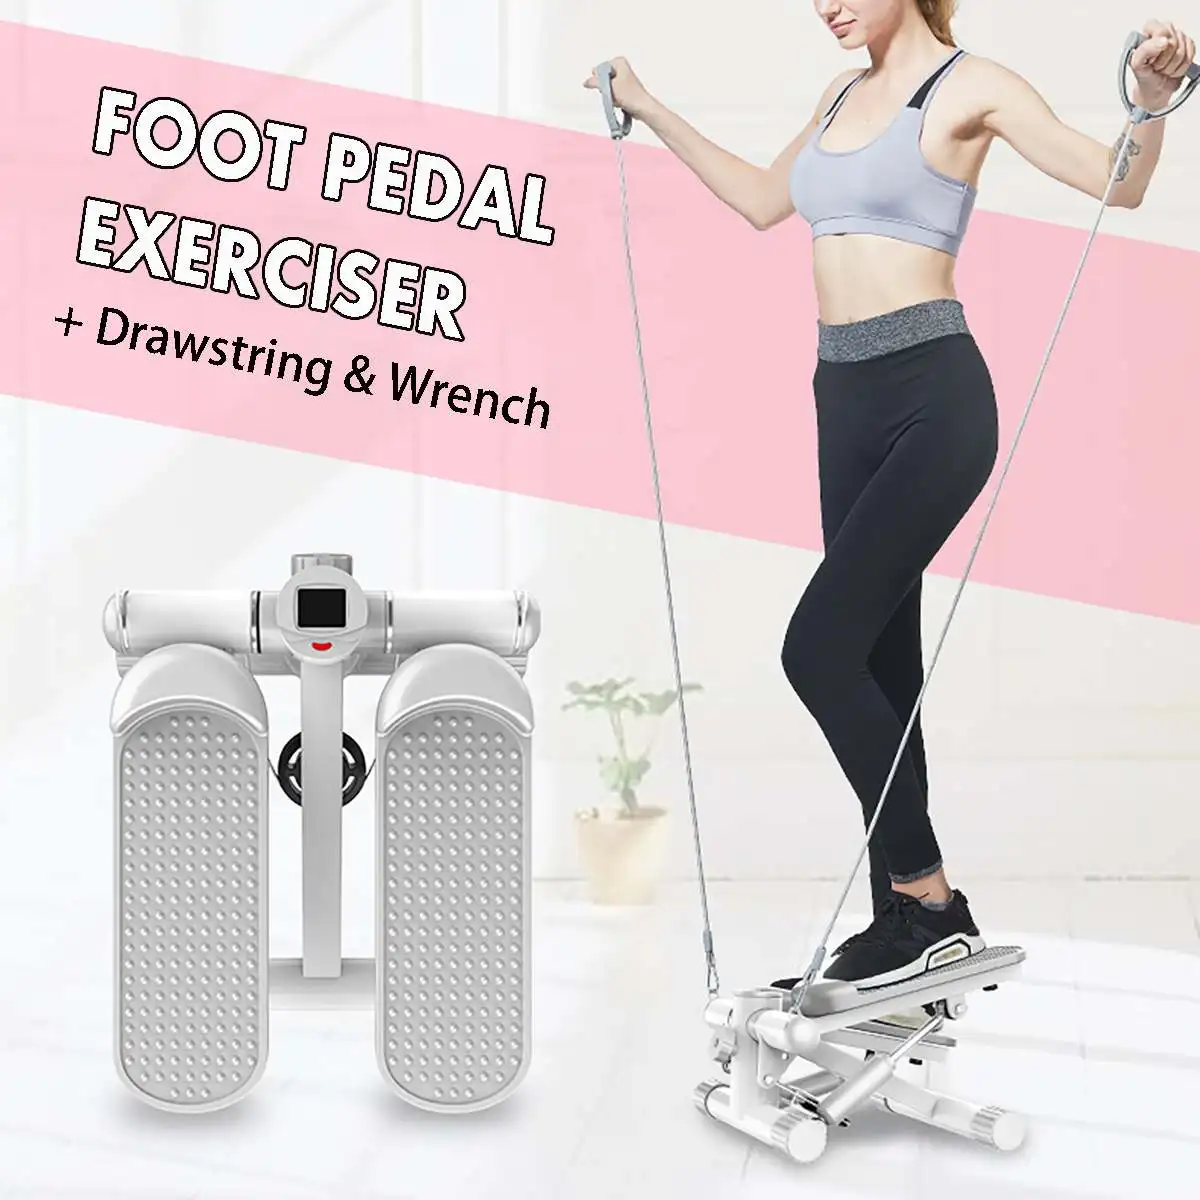 

Mini Treadmill Steppers Cycle Exerciser Hand Foot Pedal Stepper Office Home Gym for Lose Weight Leg Slimming Drawstring Wrench